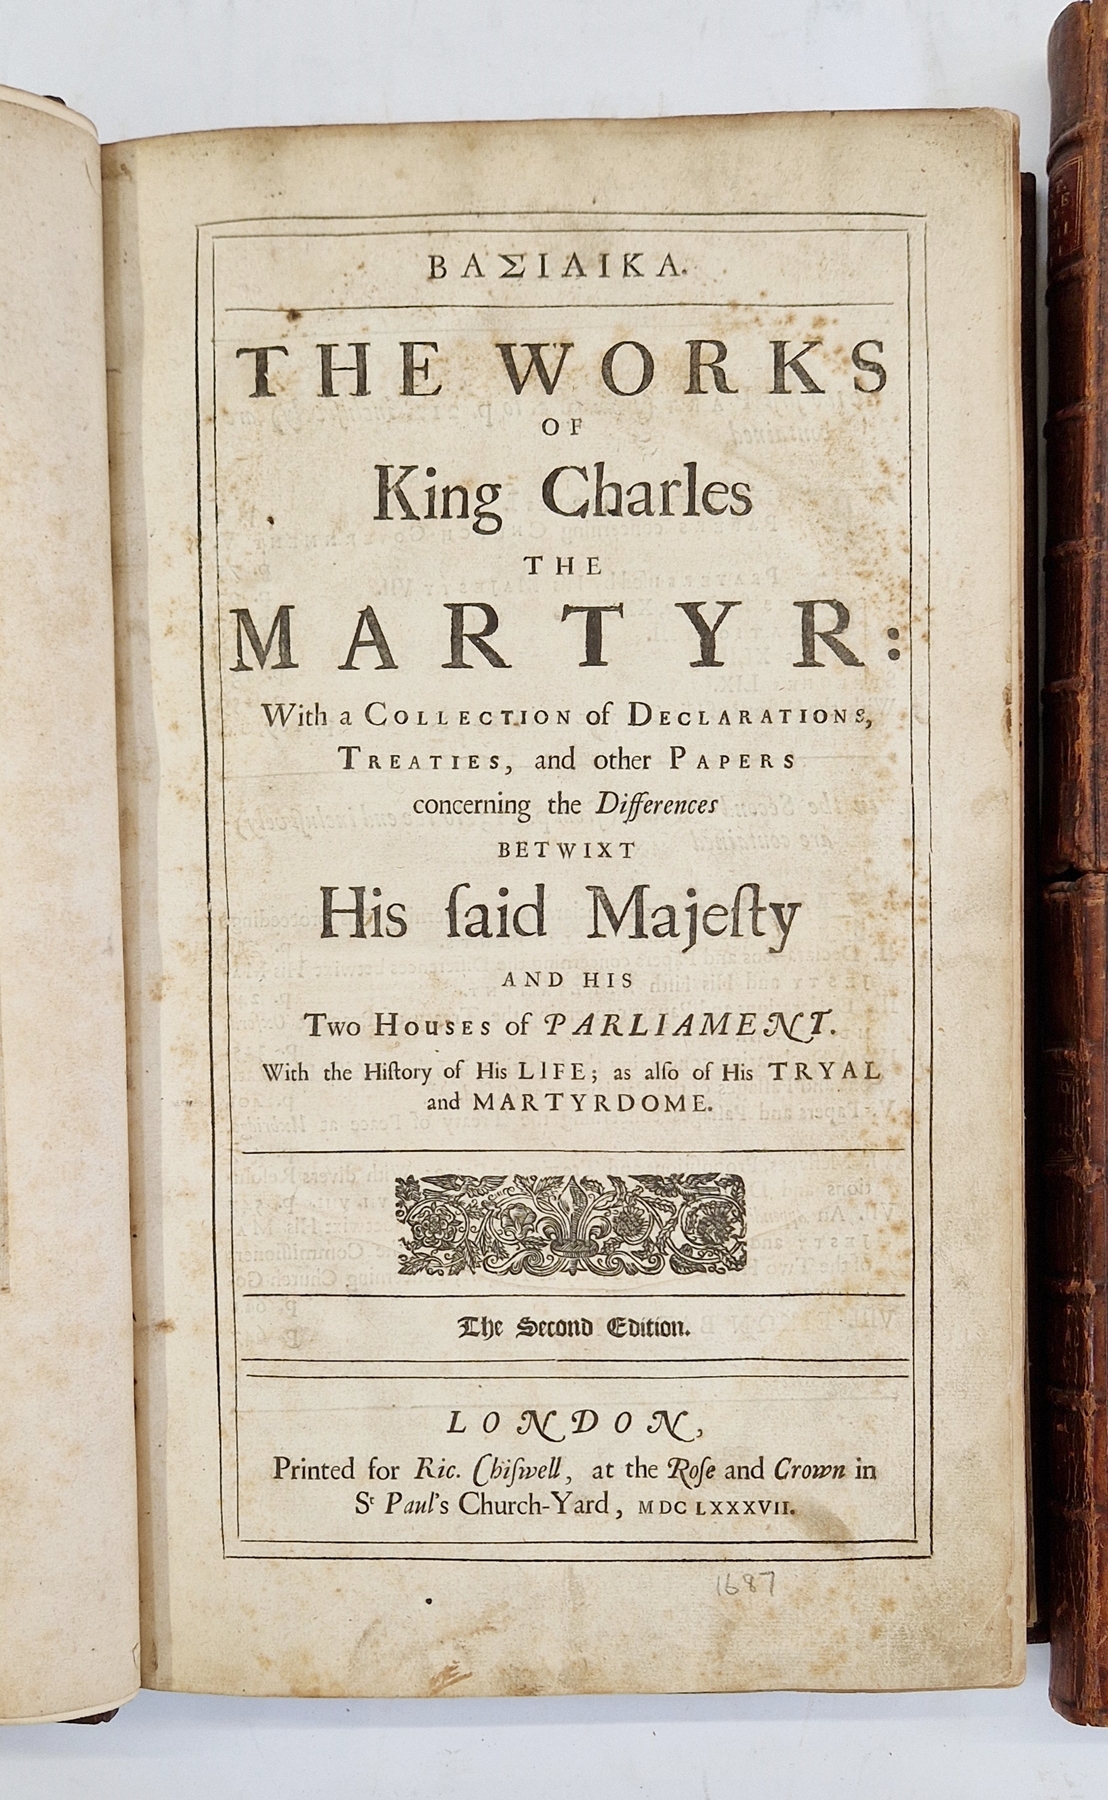 "The Works of King Charles The Martyr: with Collections of Declarations, Treaties and other Papers - Image 3 of 6